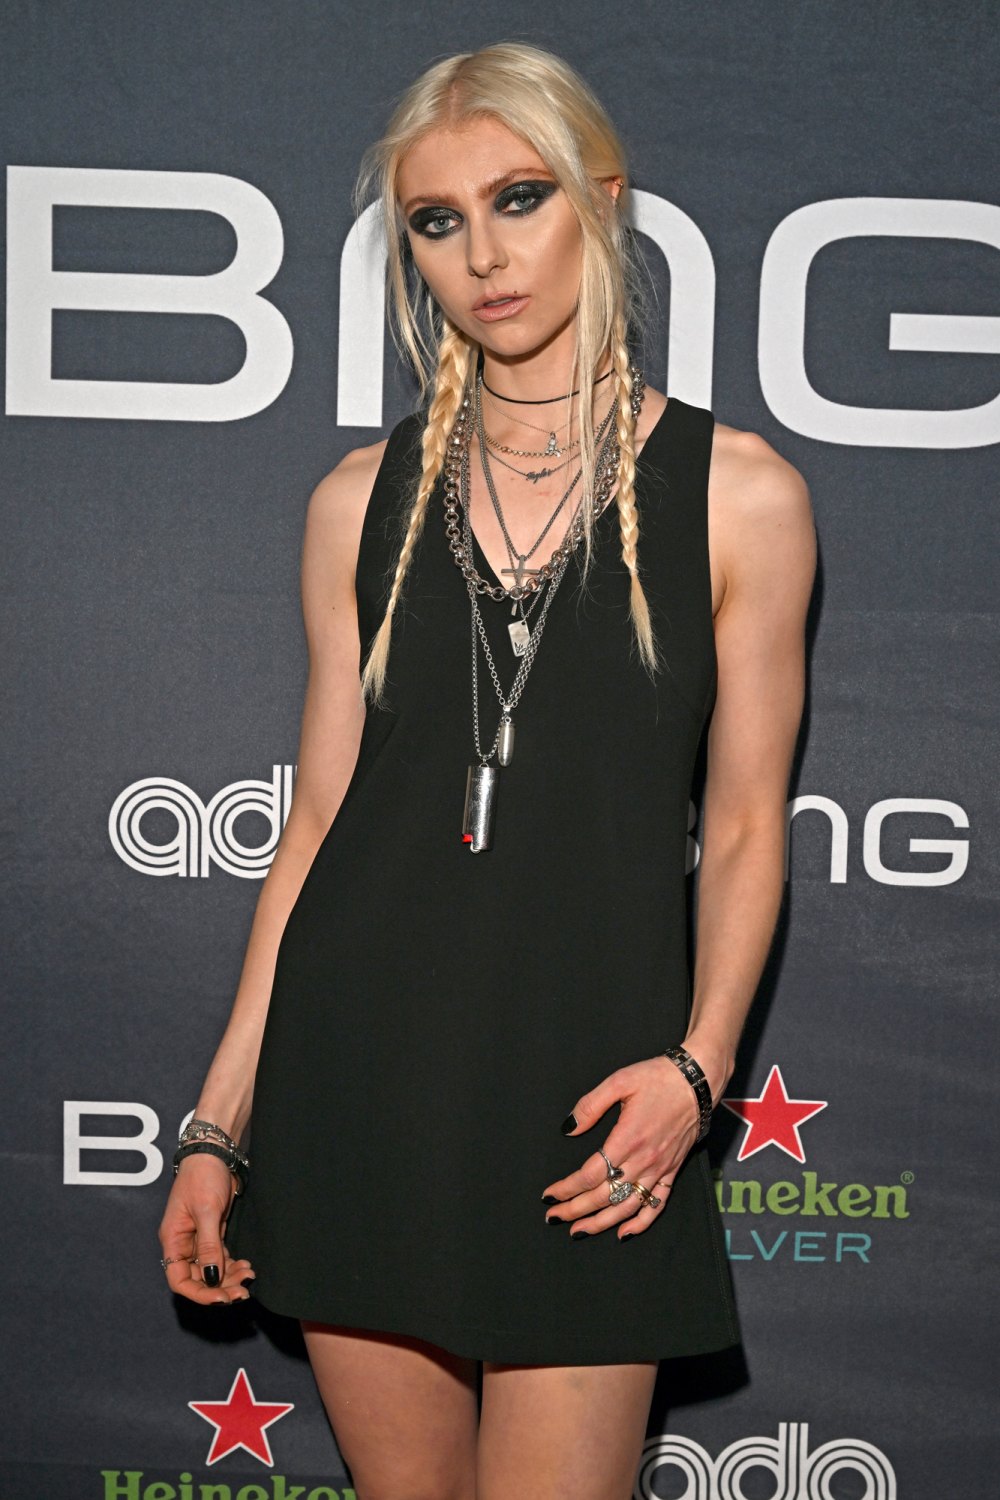 What Happened To Taylor Momsen? All About Her 'Gossip Girl' Exit